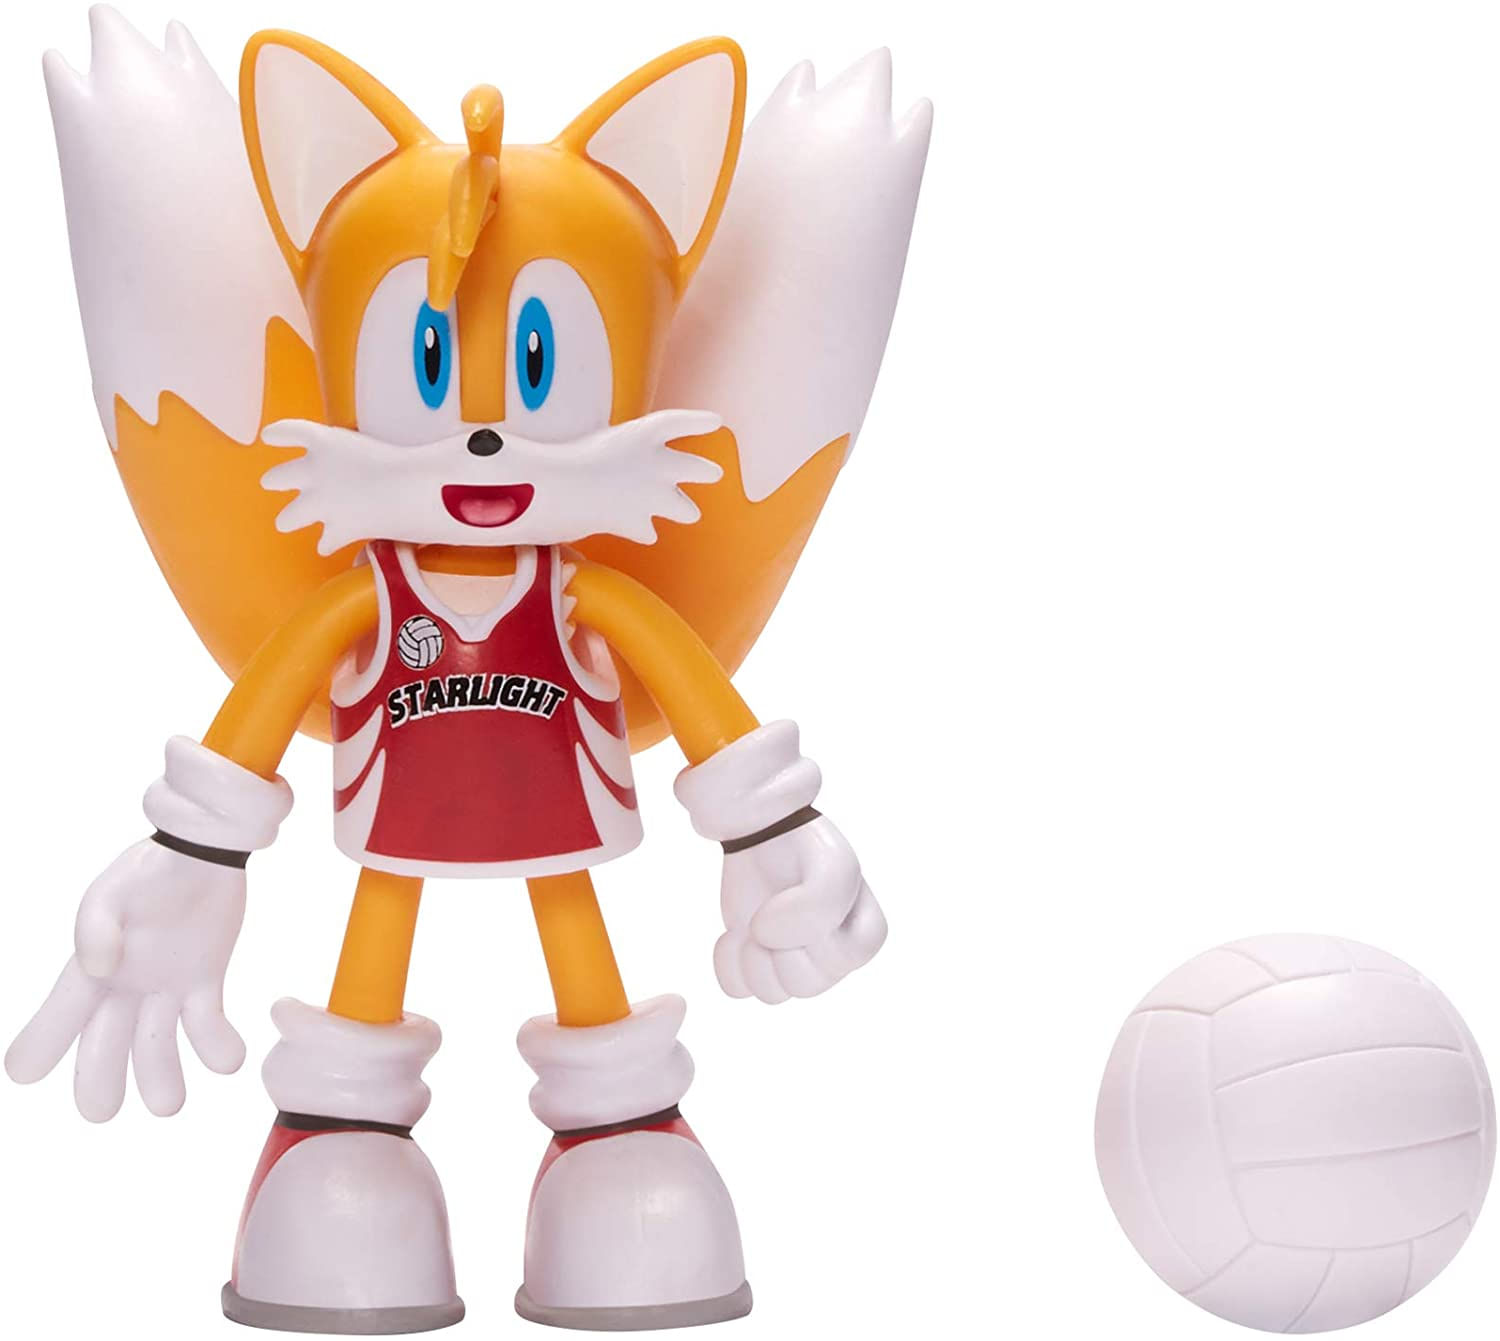 Boneco Sonic The Hedgehog Knuckles Just Toys